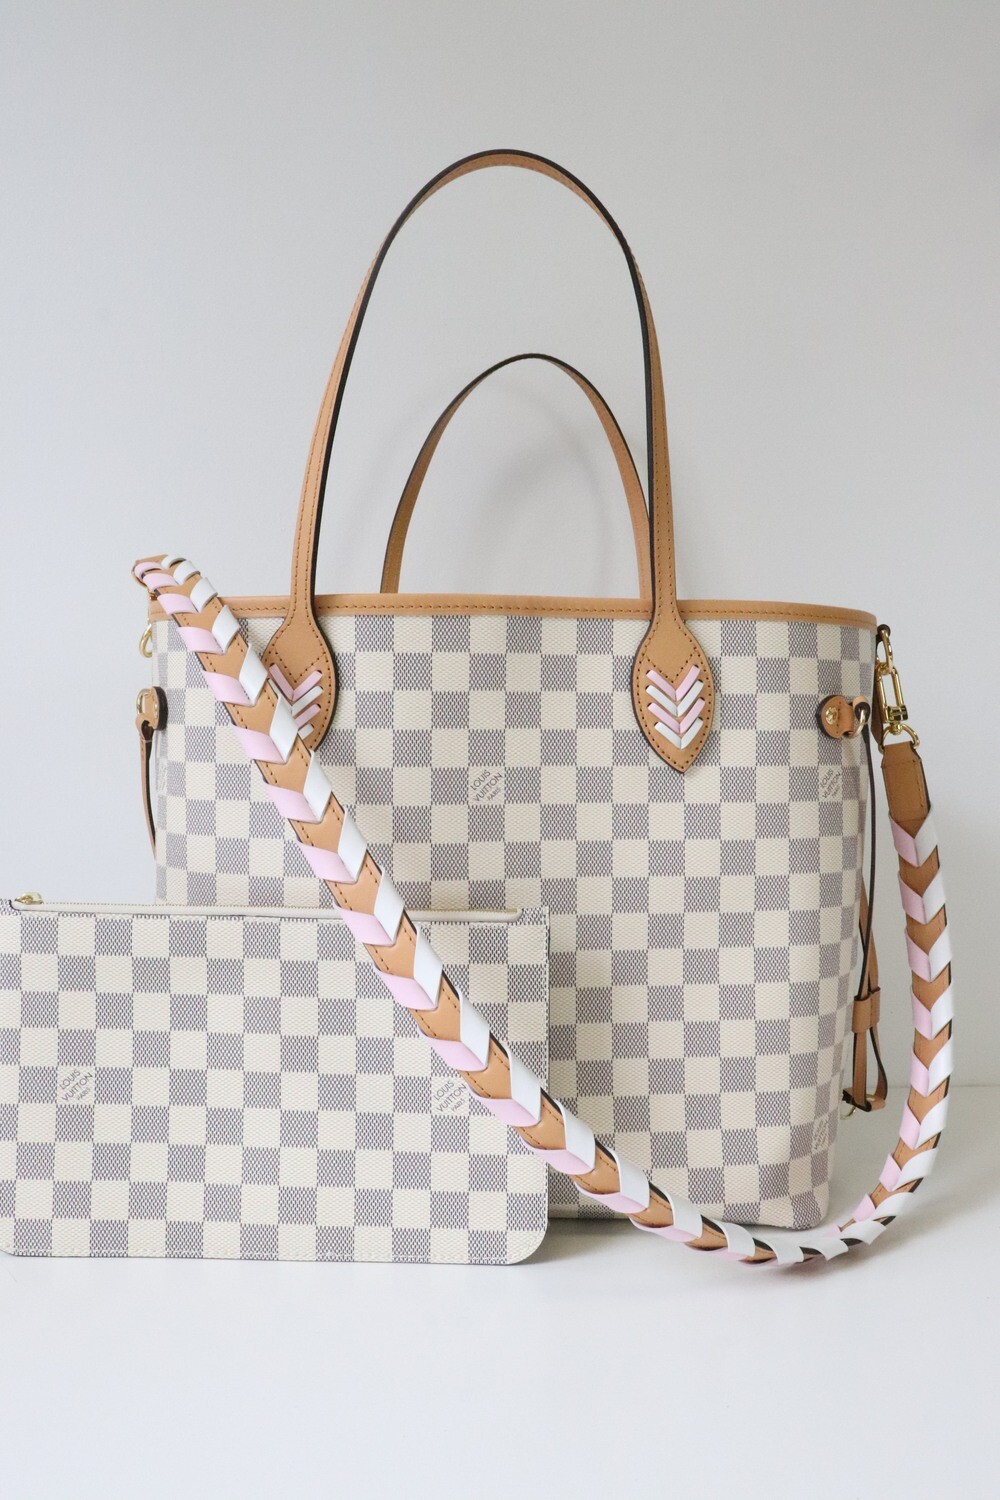 Louis Vuitton Neverfull MM Azur with Strap, New in Dustbag - Julia